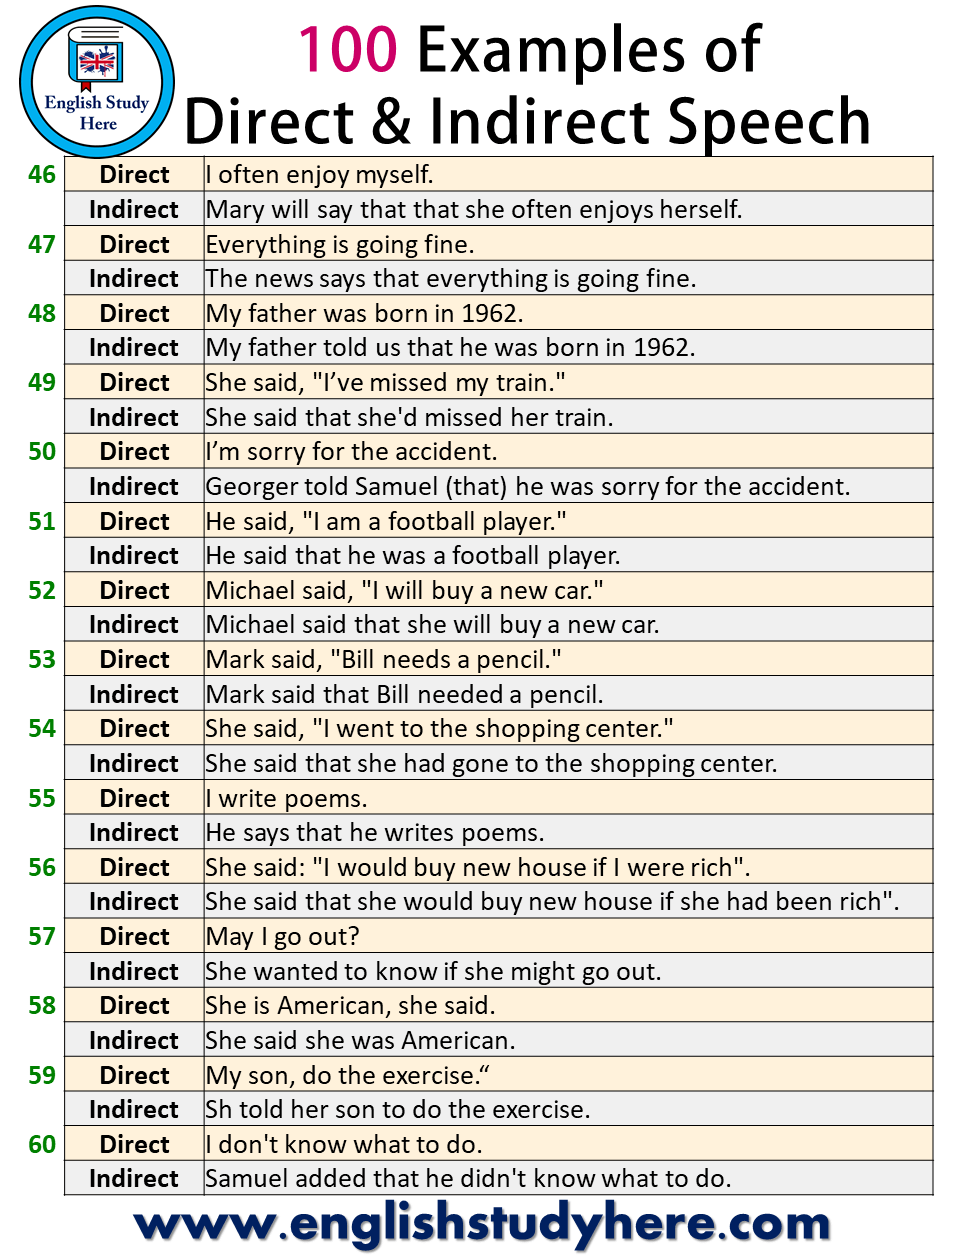 100 Examples of Direct and Indirect Reported Speech in English